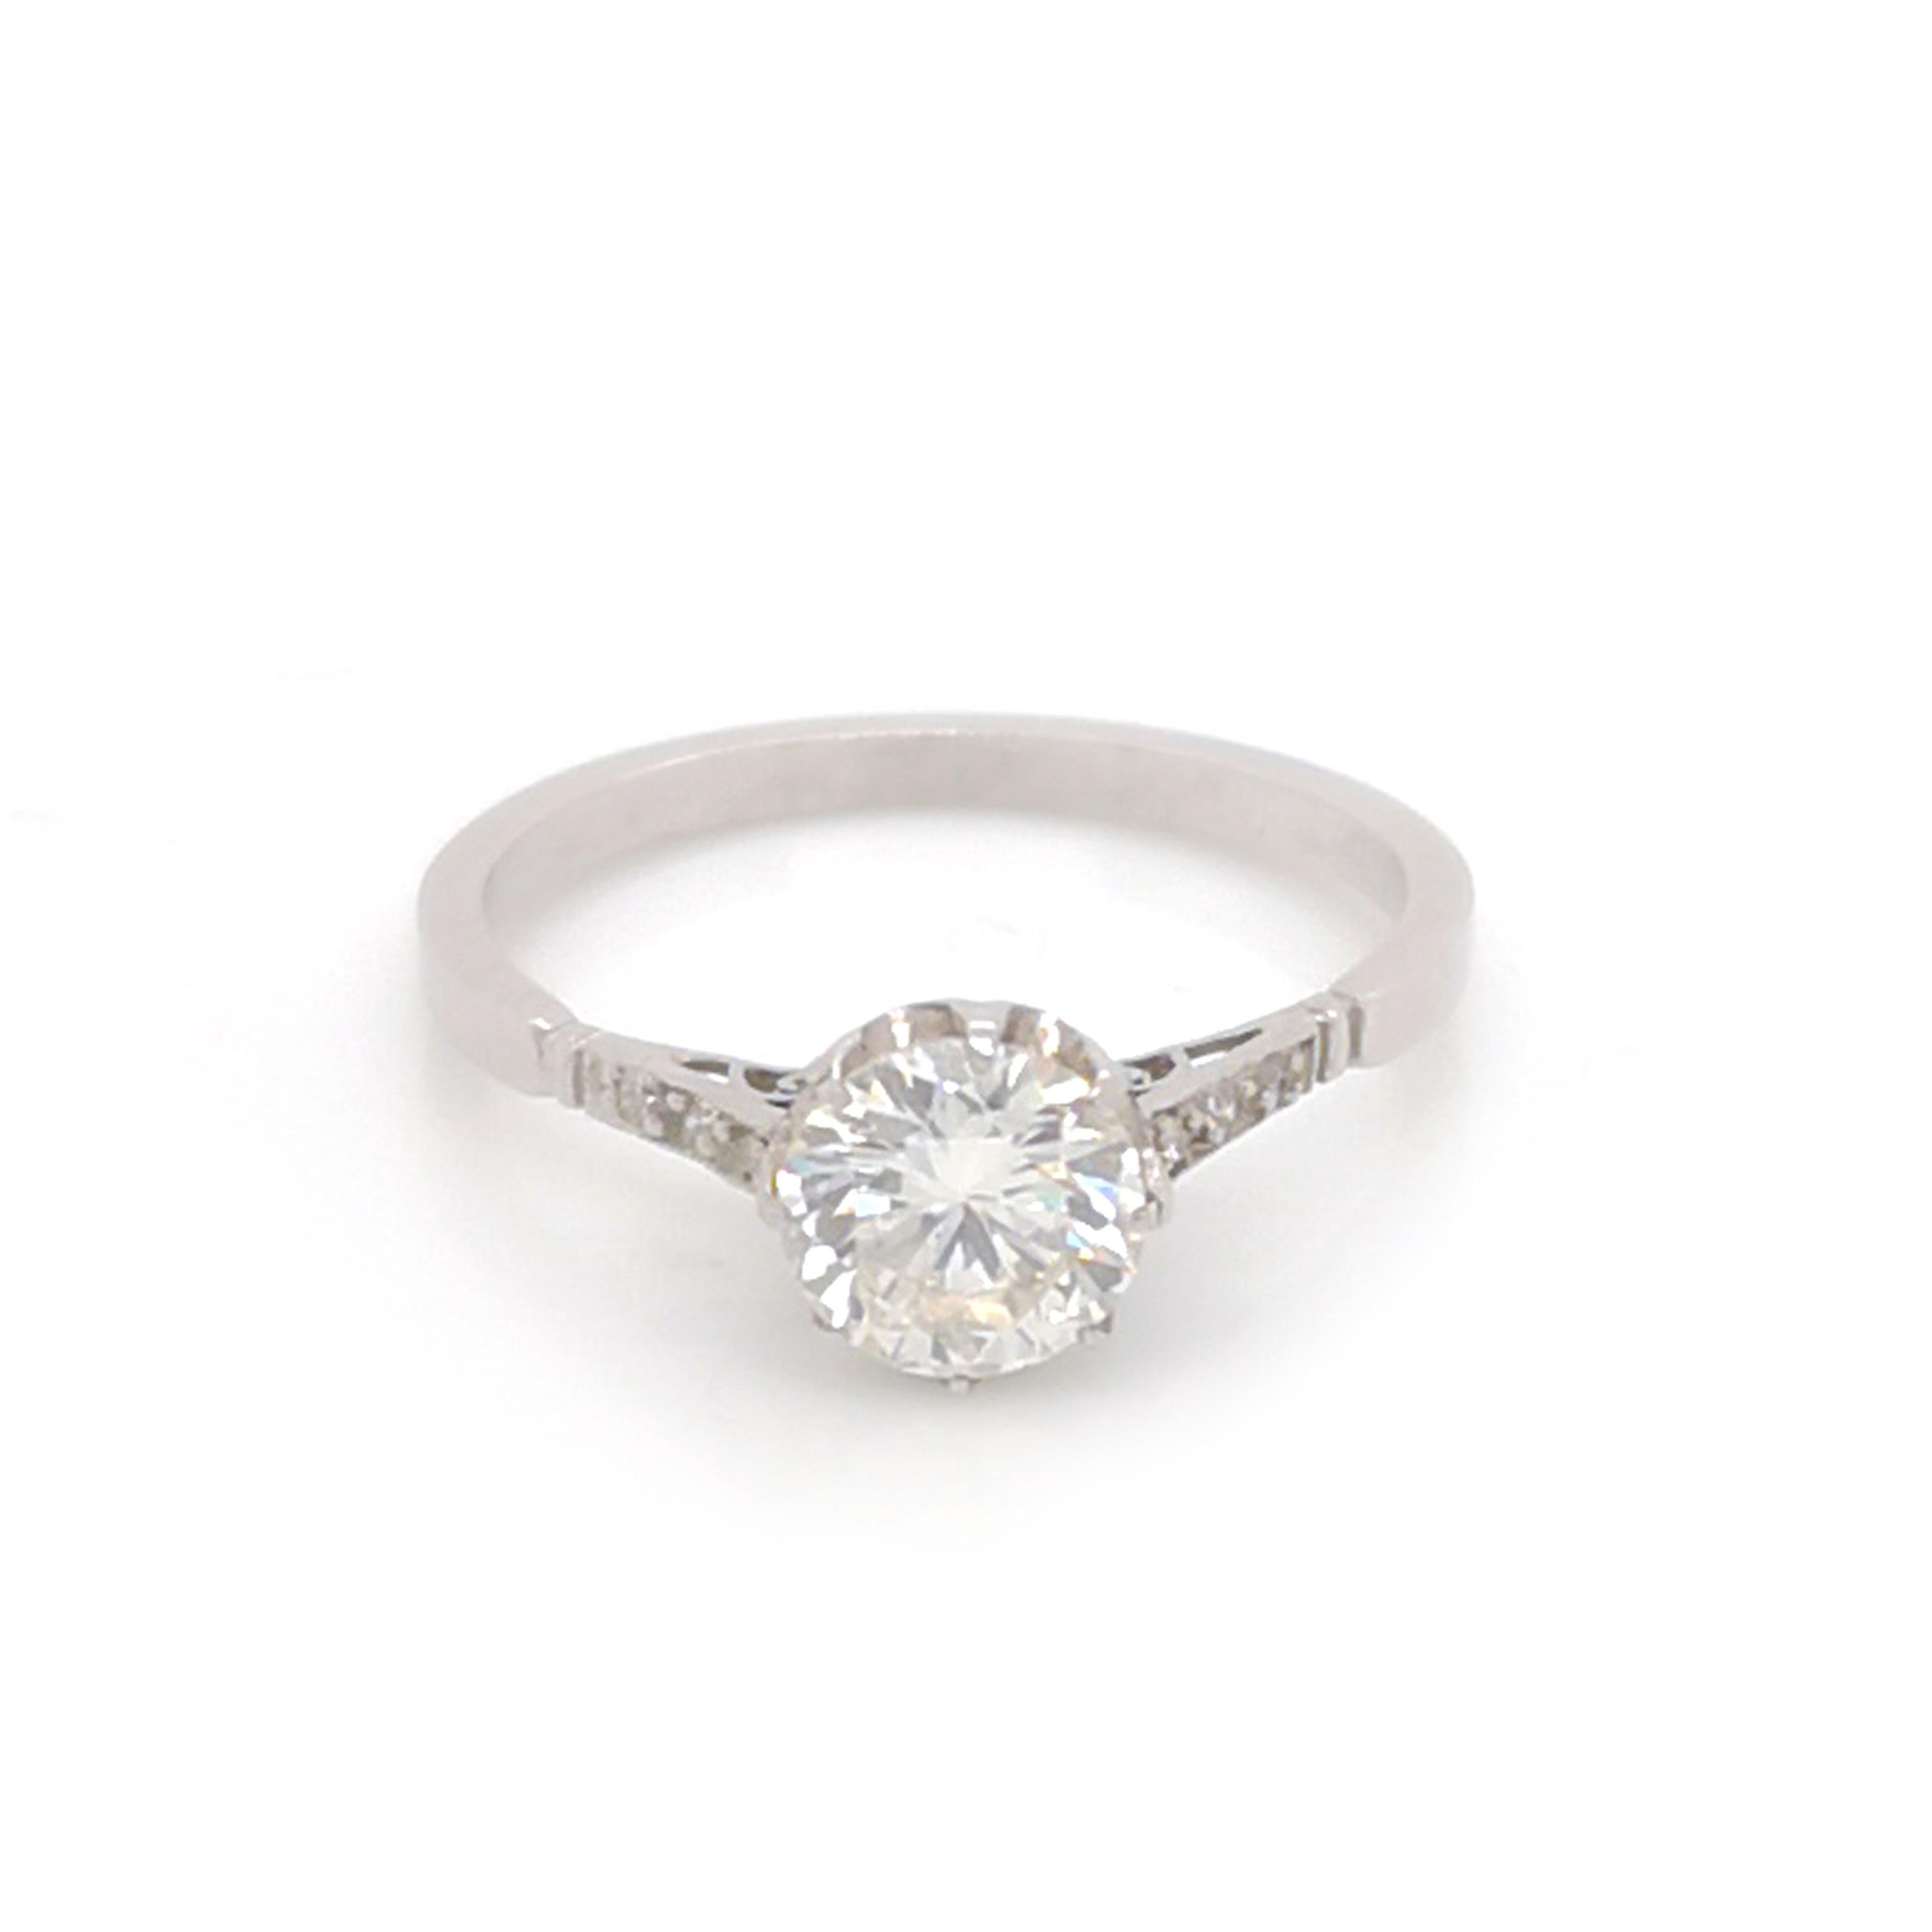 A diamond solitaire ring, set with a 0.87ct Edwardian-cut diamond, with three old-cut diamonds set in each shoulder, mounted in platinum. In our opinion, the colour is I-J, the clarity is VS2.

Finger size N 1/2 UK / 6 3/4 US.